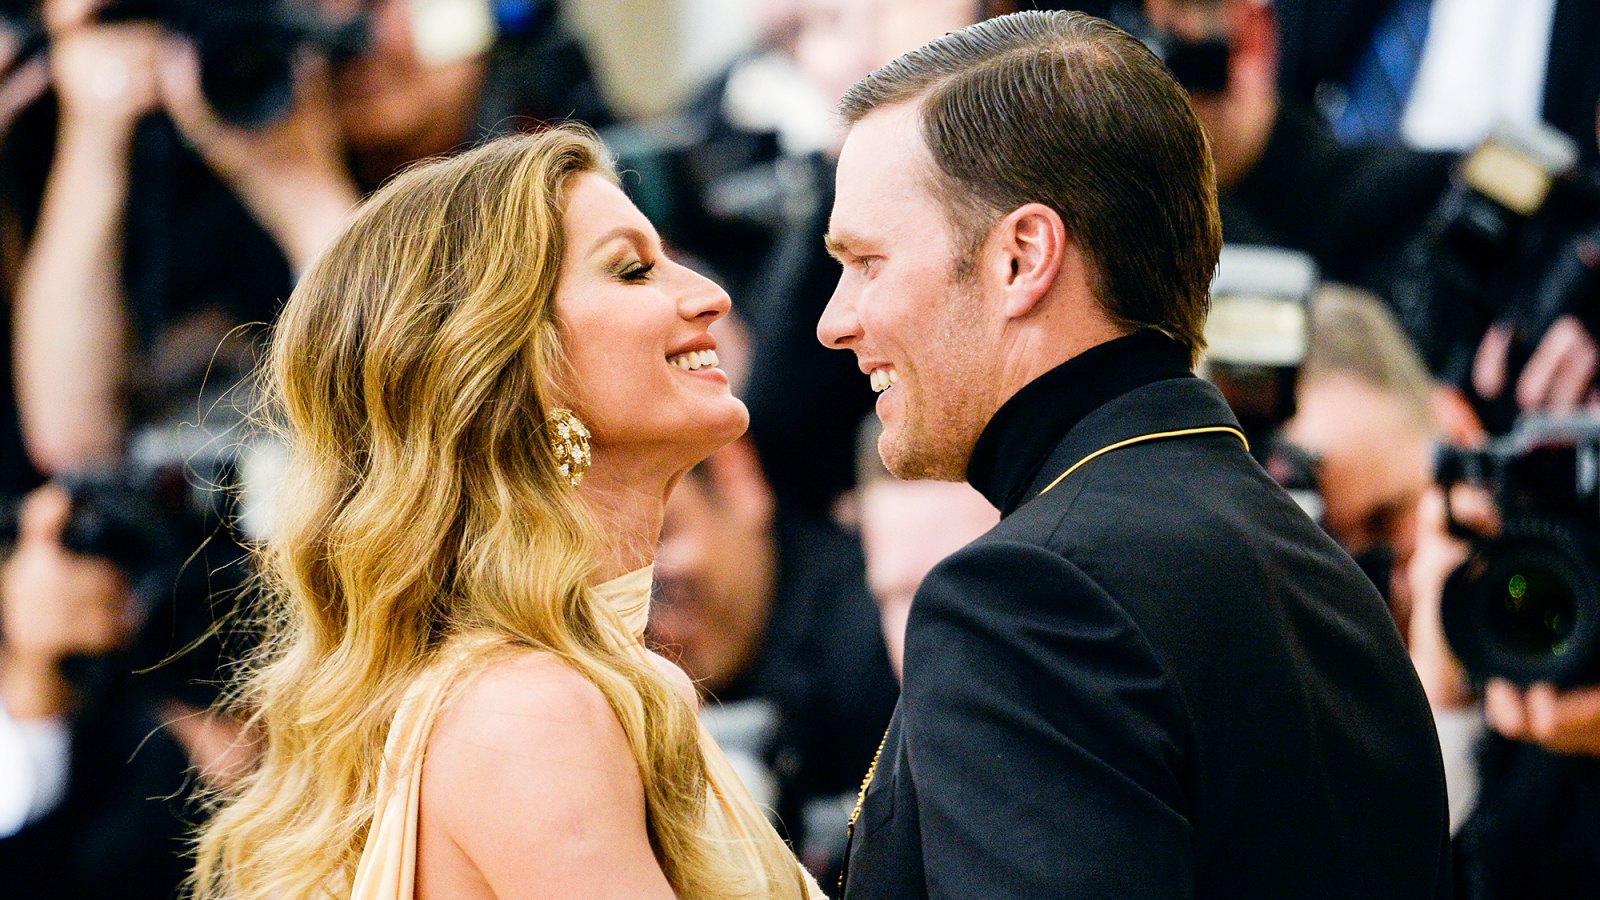 Gisele Bundchen Recalls Her Blind First Date With Husband Tom Brady: I Fell in Love 'Right Away'